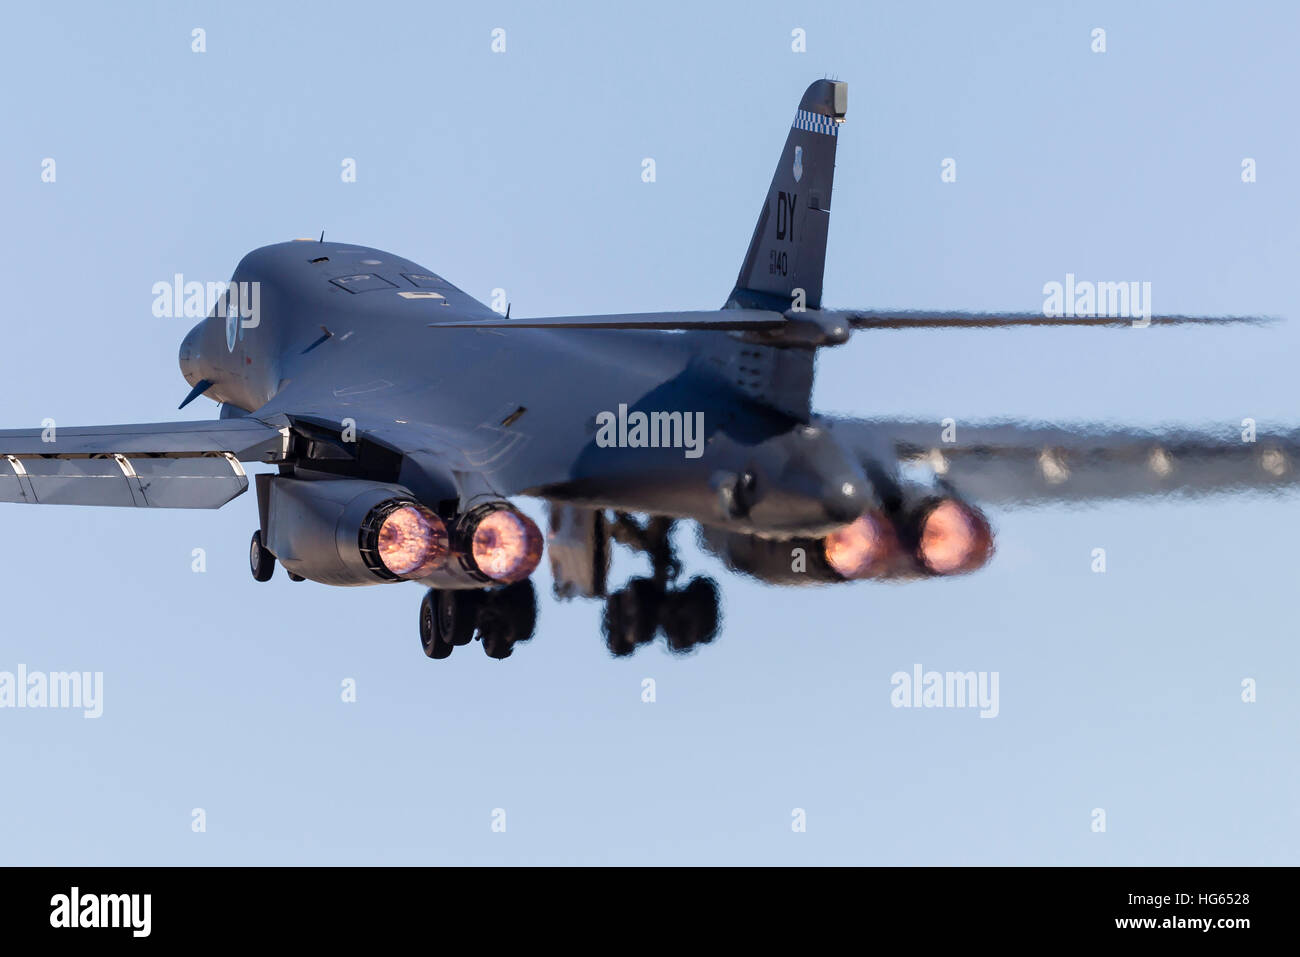 A B-1B Lancer of the U.S. Air Force taking off from Nellis Air Force Base, Nevada. Stock Photo